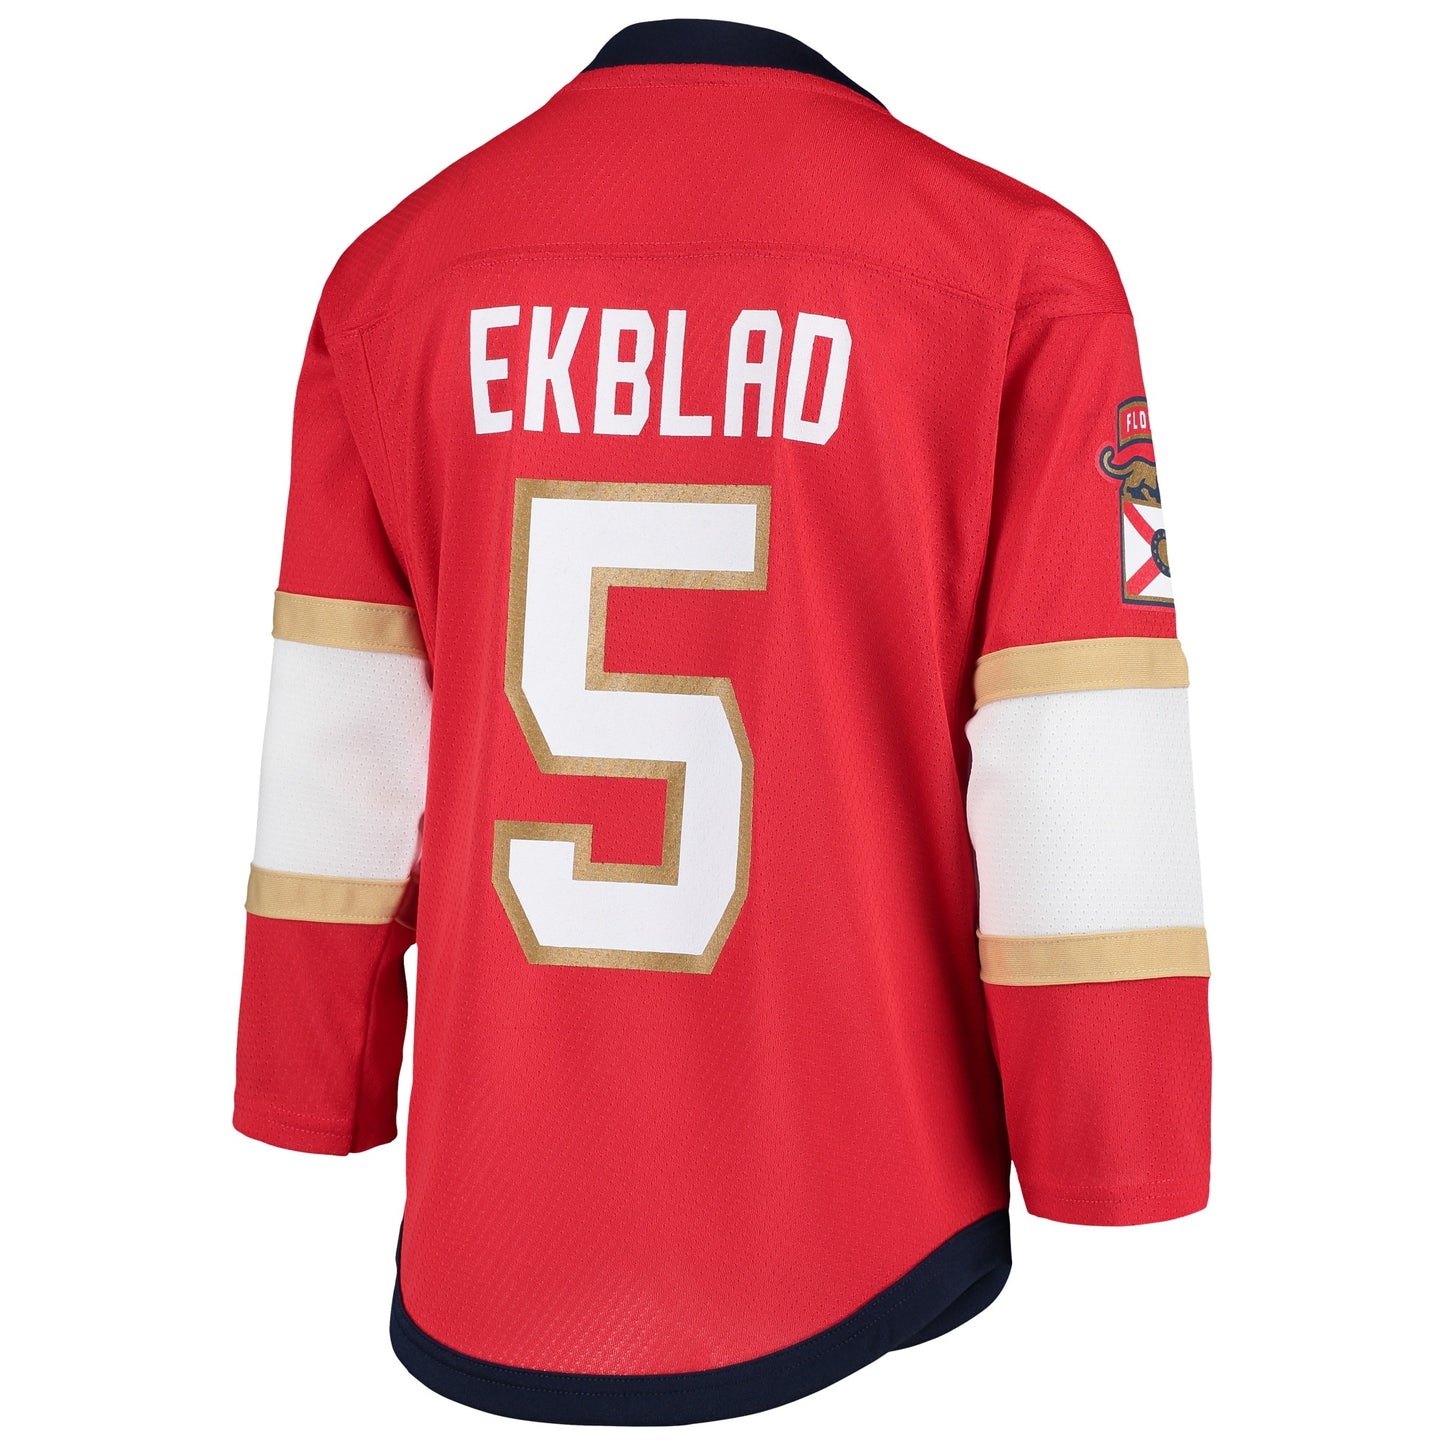 Aaron Ekblad Florida Panthers Youth Home Replica Player Jersey &#8211; Red